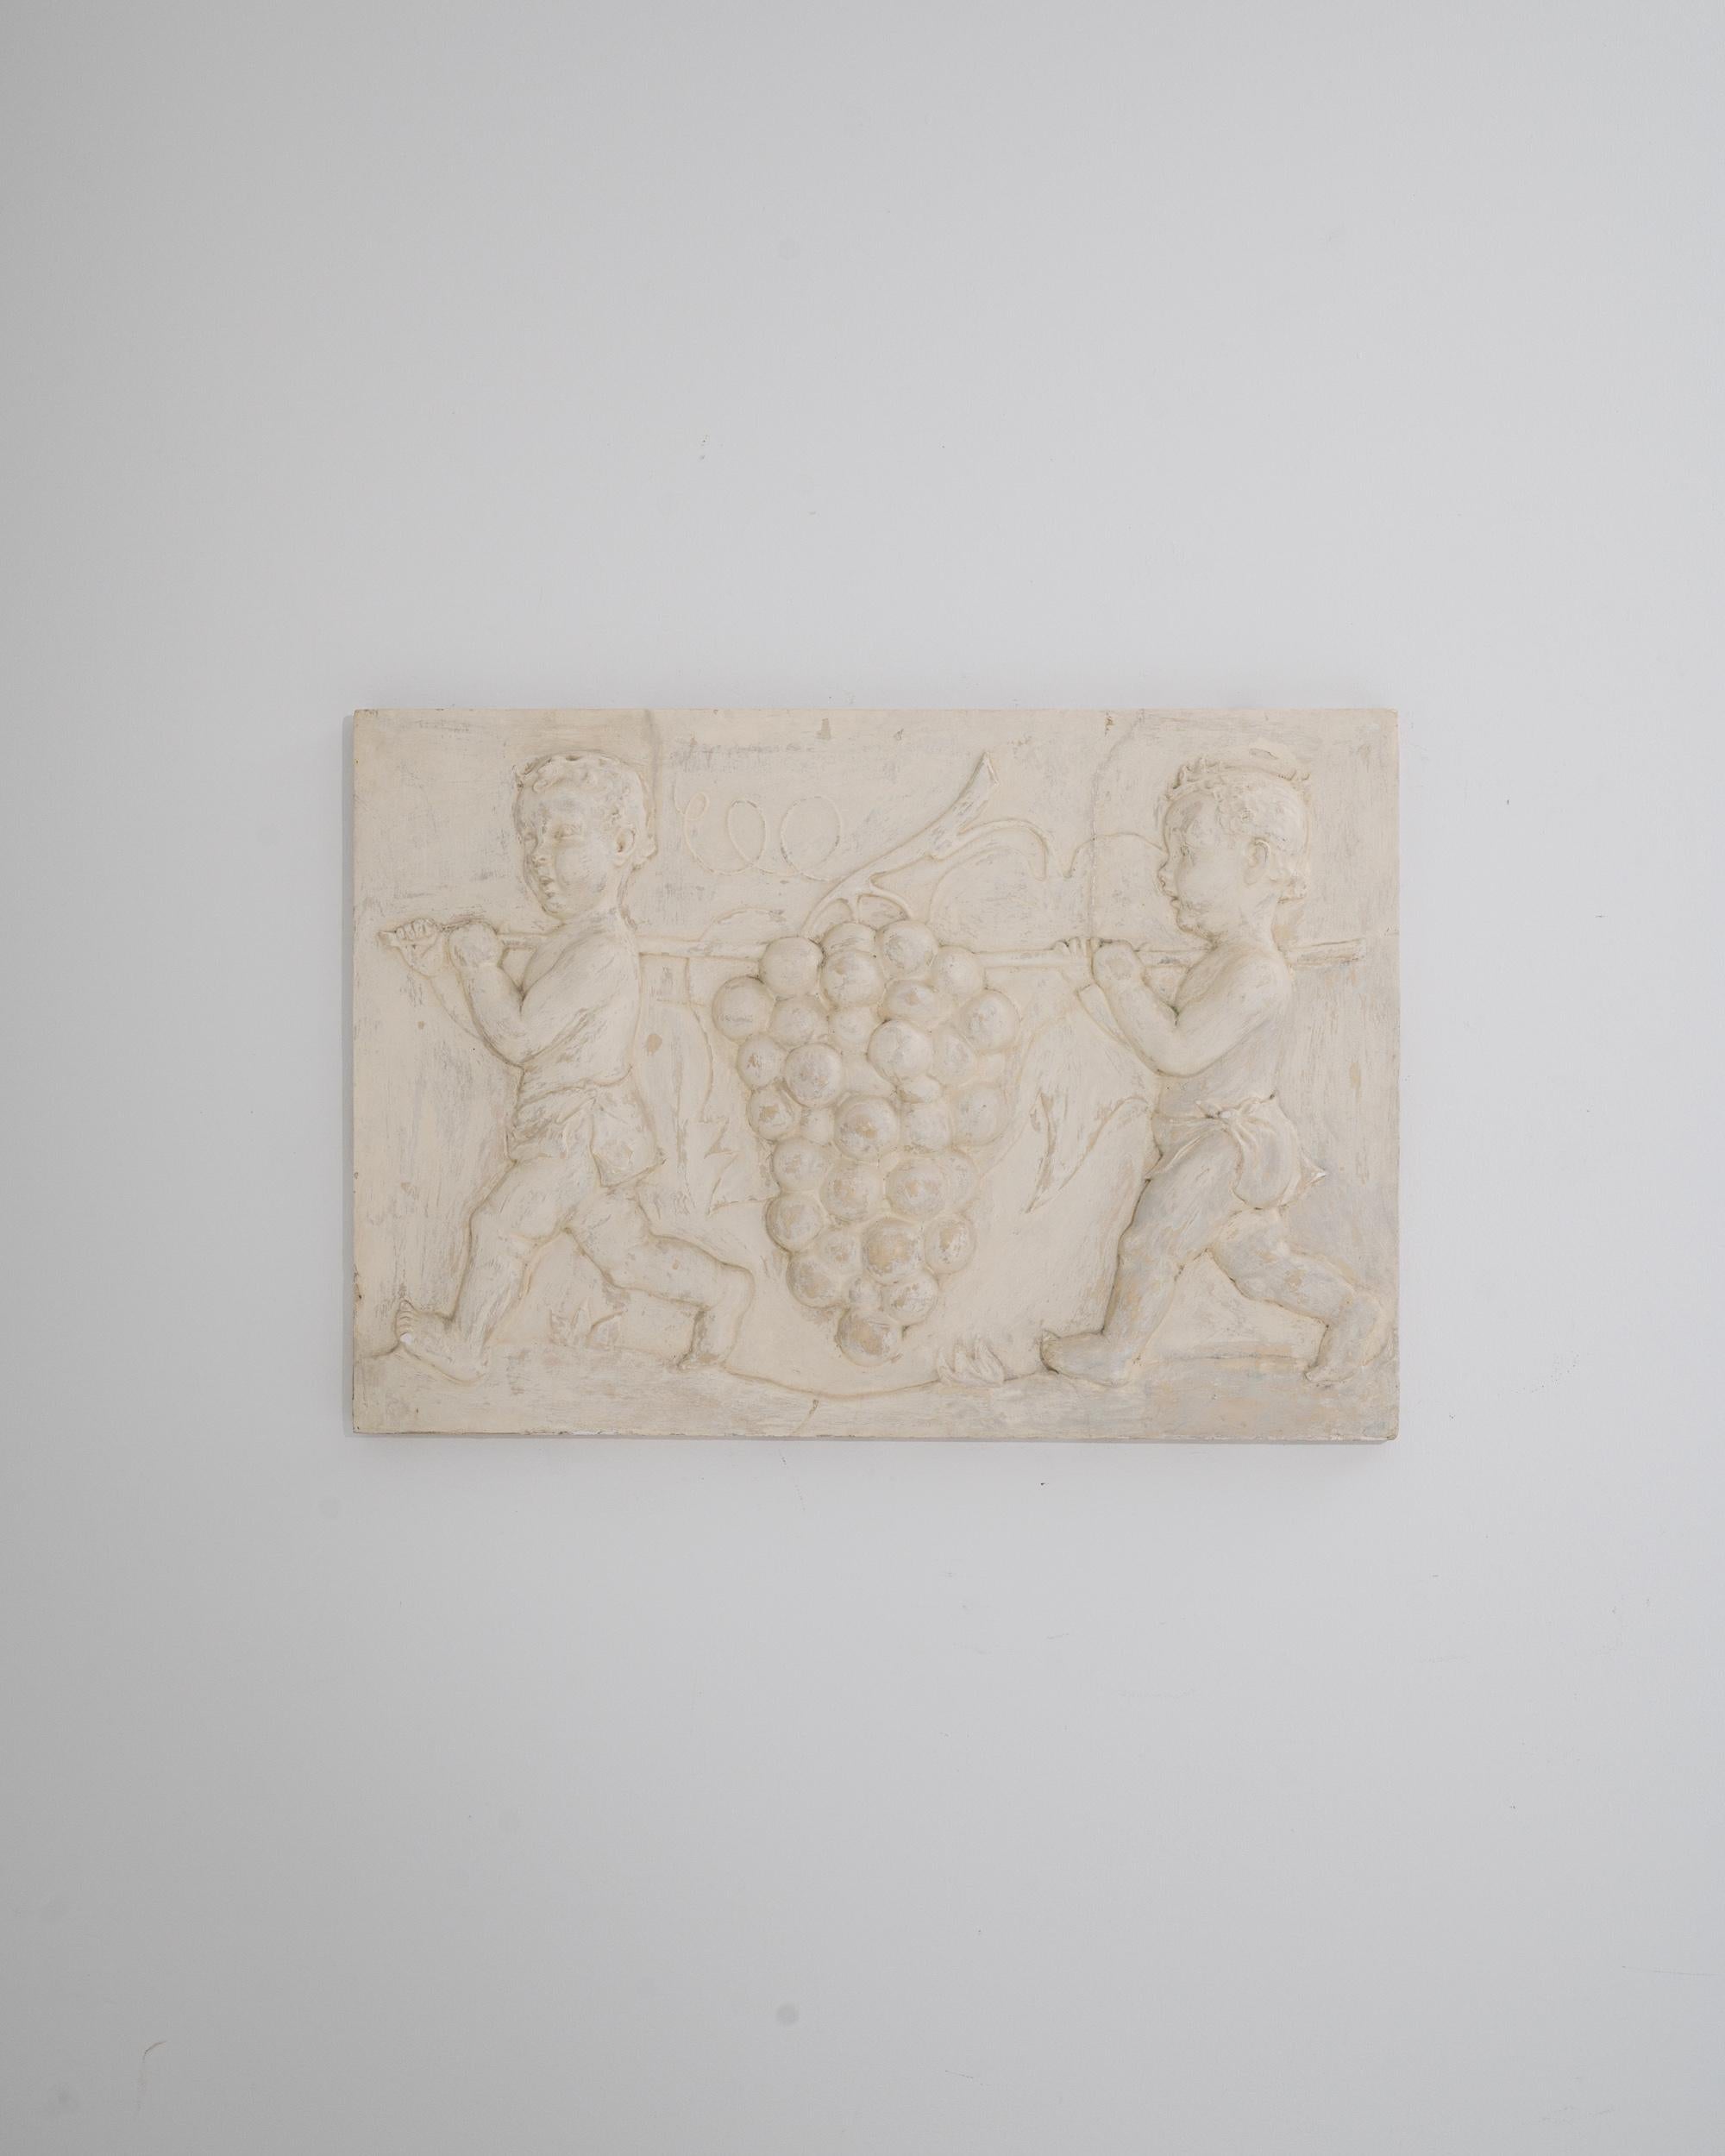 A vintage plaster wall decoration depicting two putti carrying an enormous bunch of grapes. Made in France in the 20th century, the white plaster relief evokes the decorative arts of the French academy. The playful game of scale between the size of